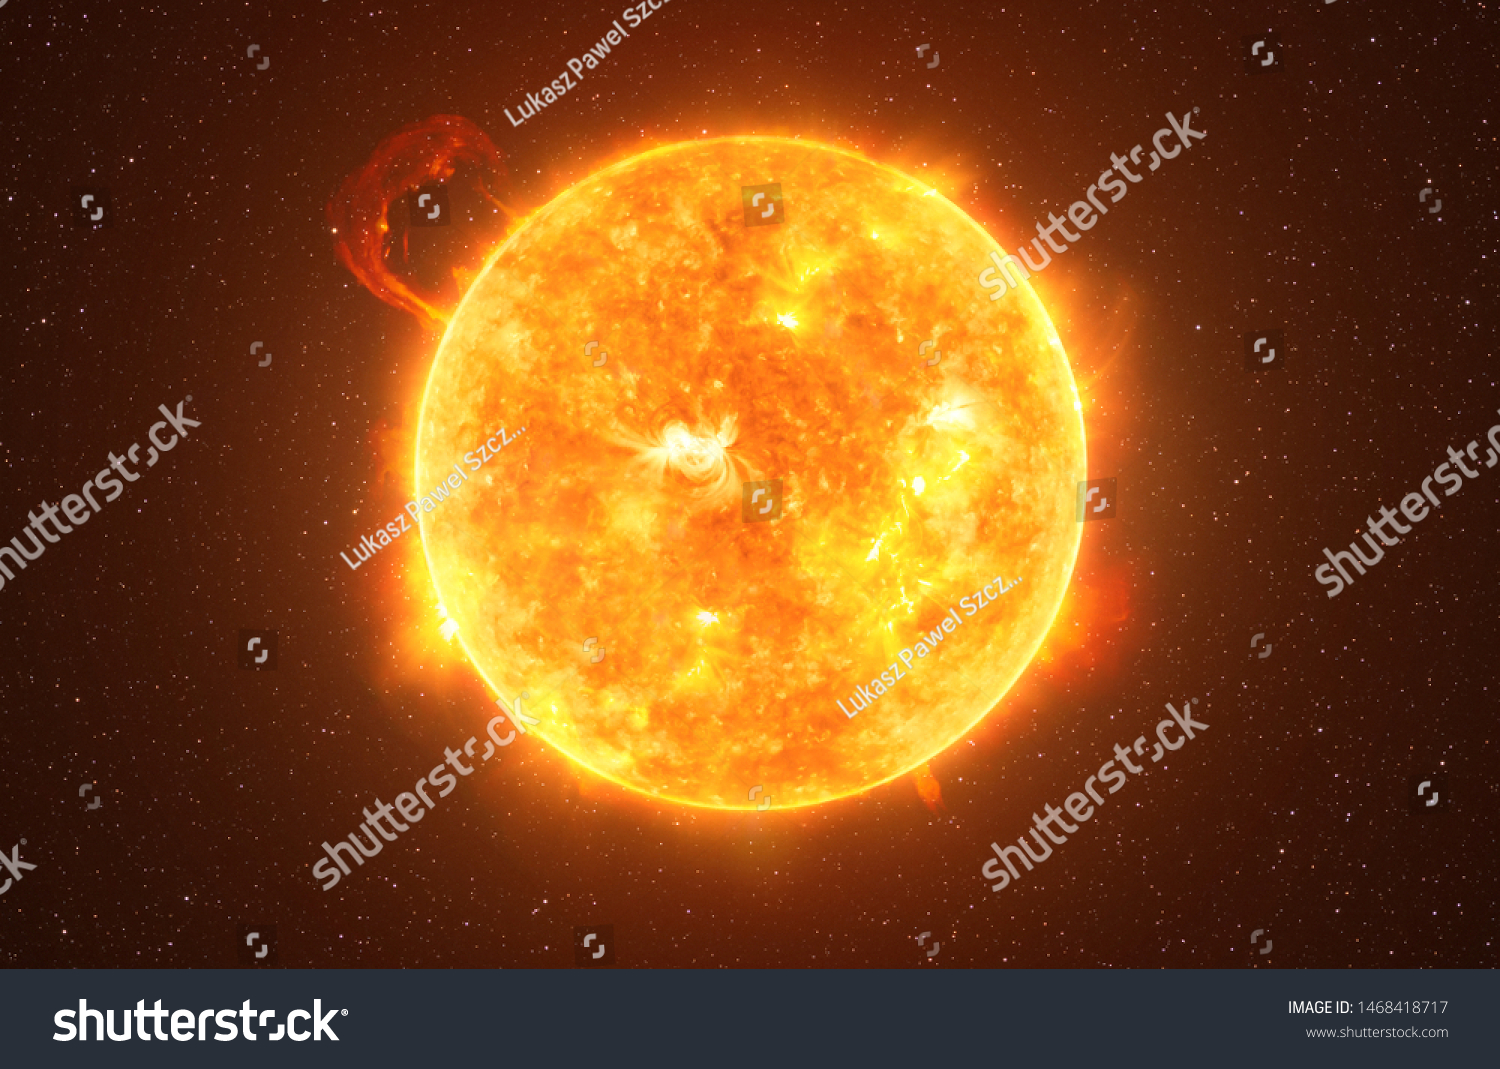 Bright Sun against dark starry sky in Solar System, elements of this image furnished by NASA #1468418717